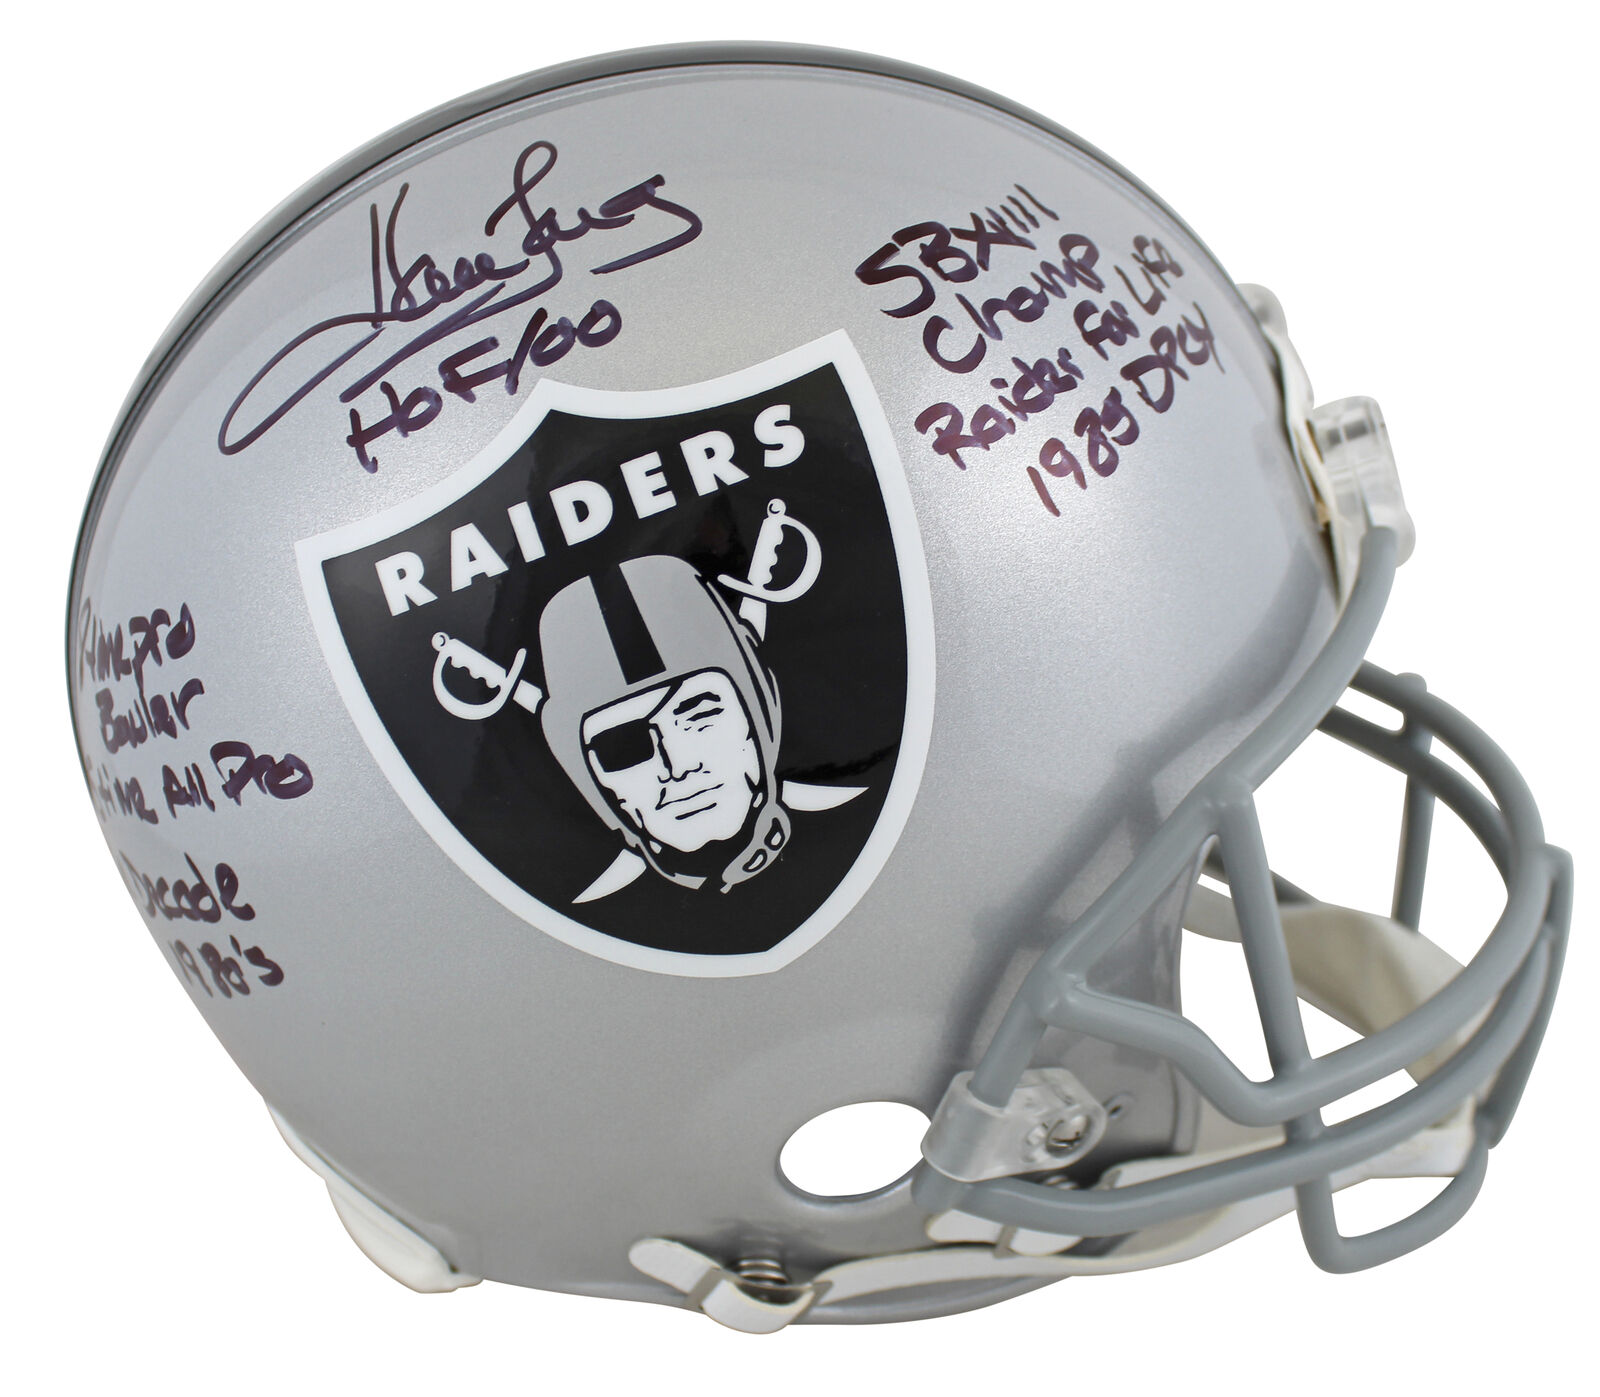 Raiders Howie Long "career Stat" Signed Authentic Proline Full Size Helmet Bas